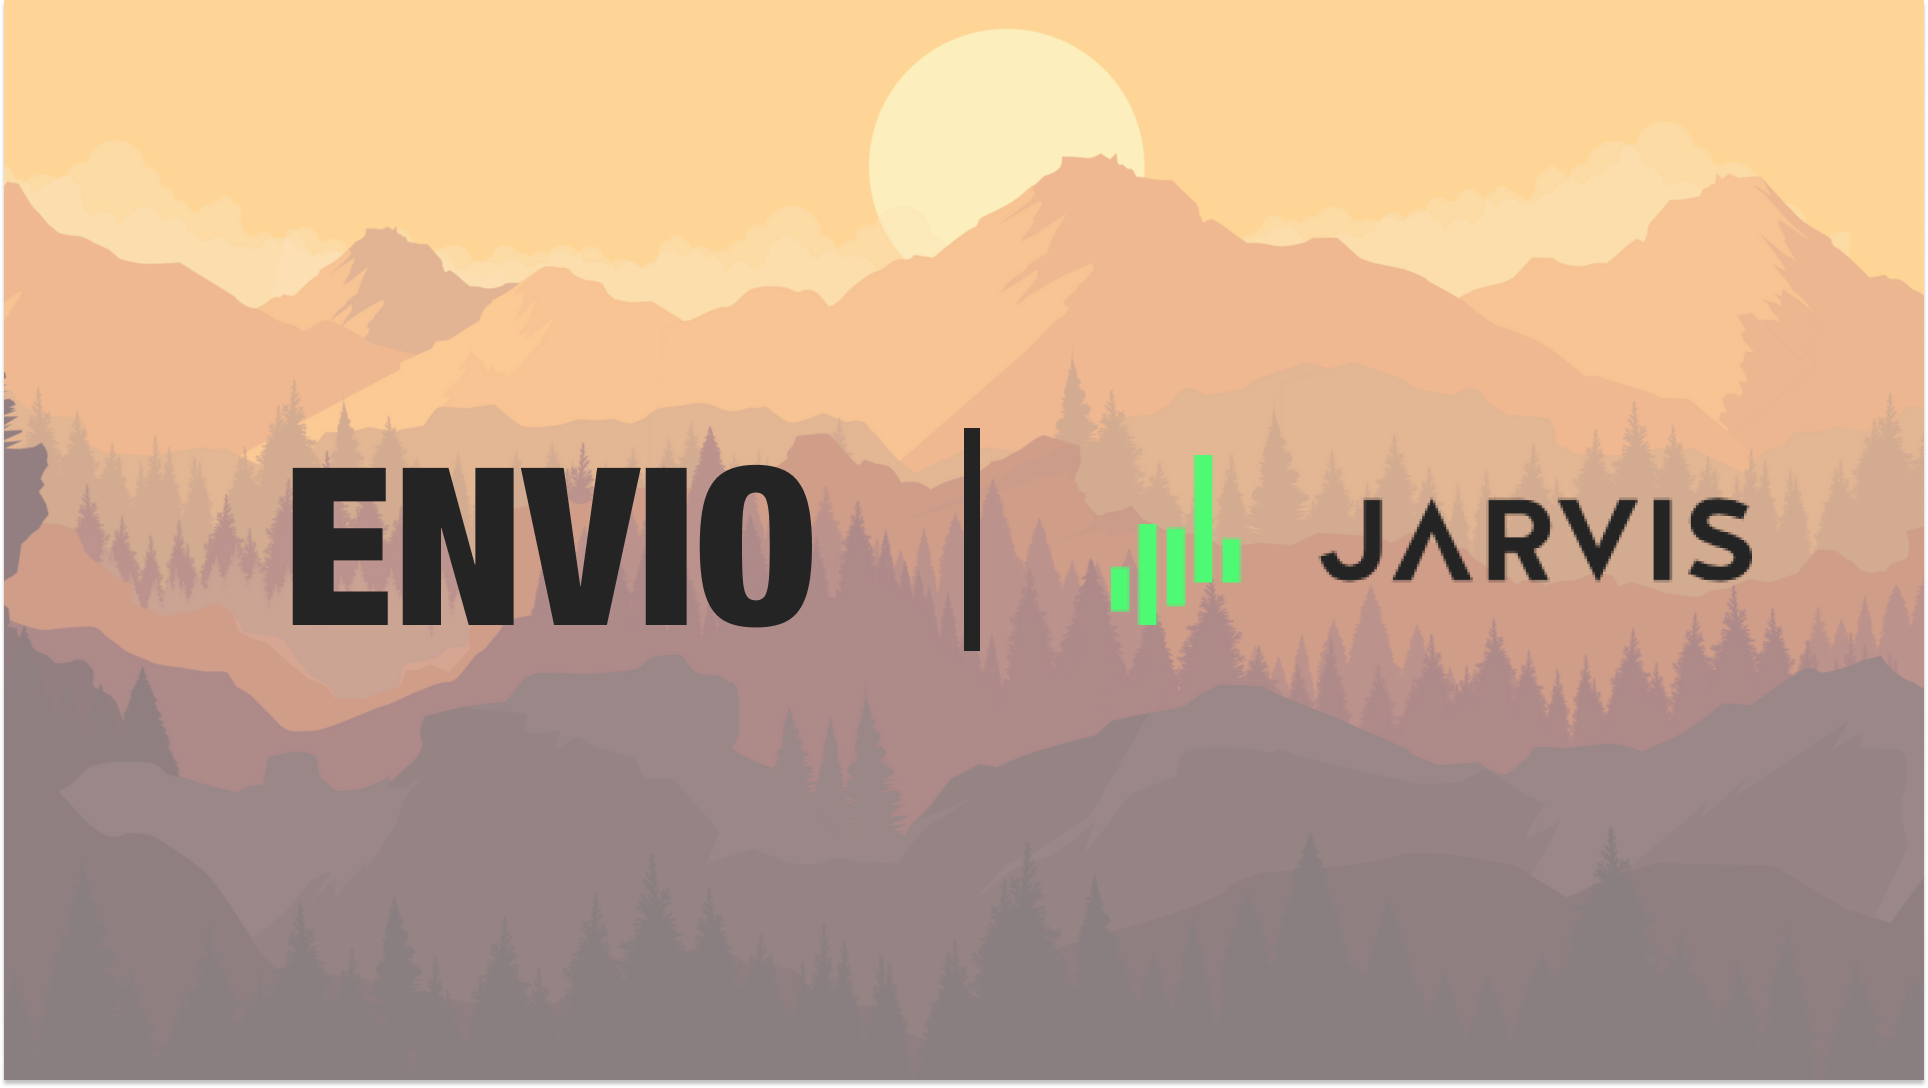 Cover Image Envio Empowers Jarvis Network